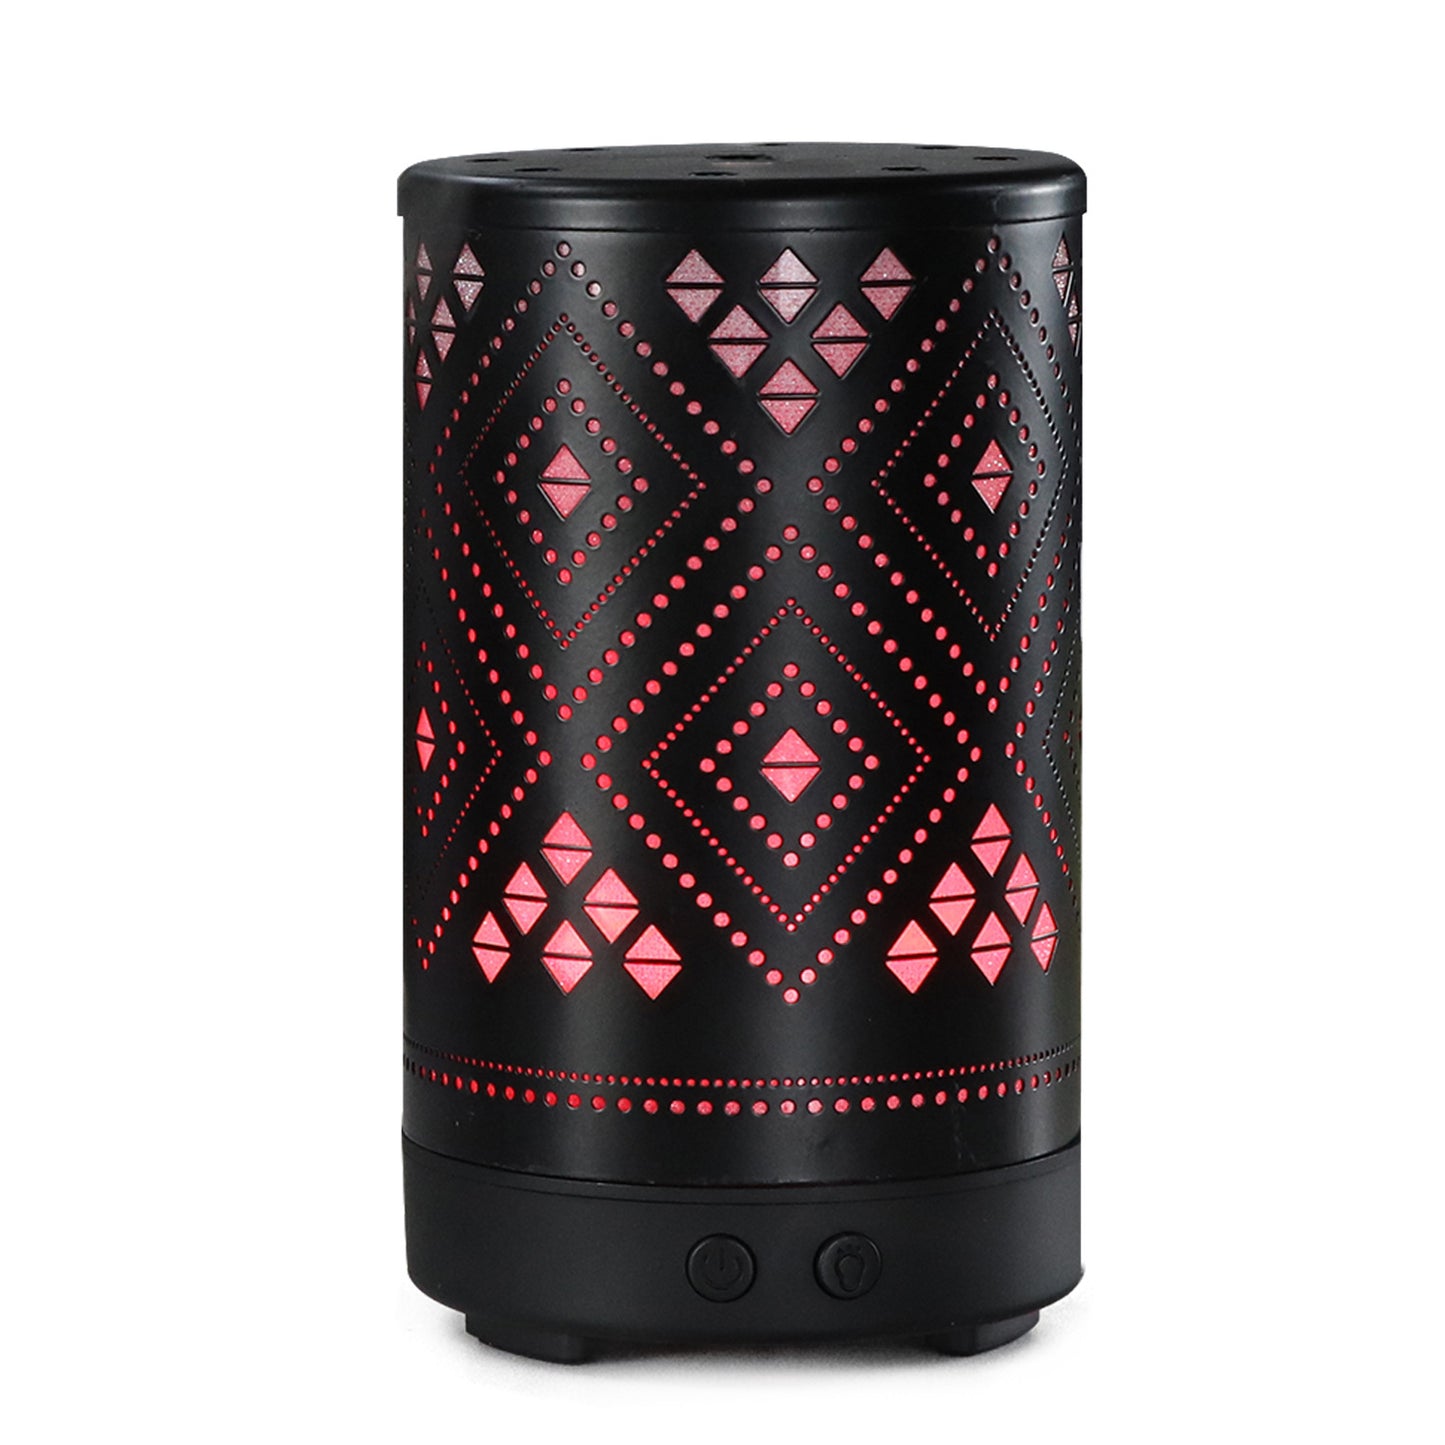 Household Hollow Pervious Aroma Diffuser Humidifier